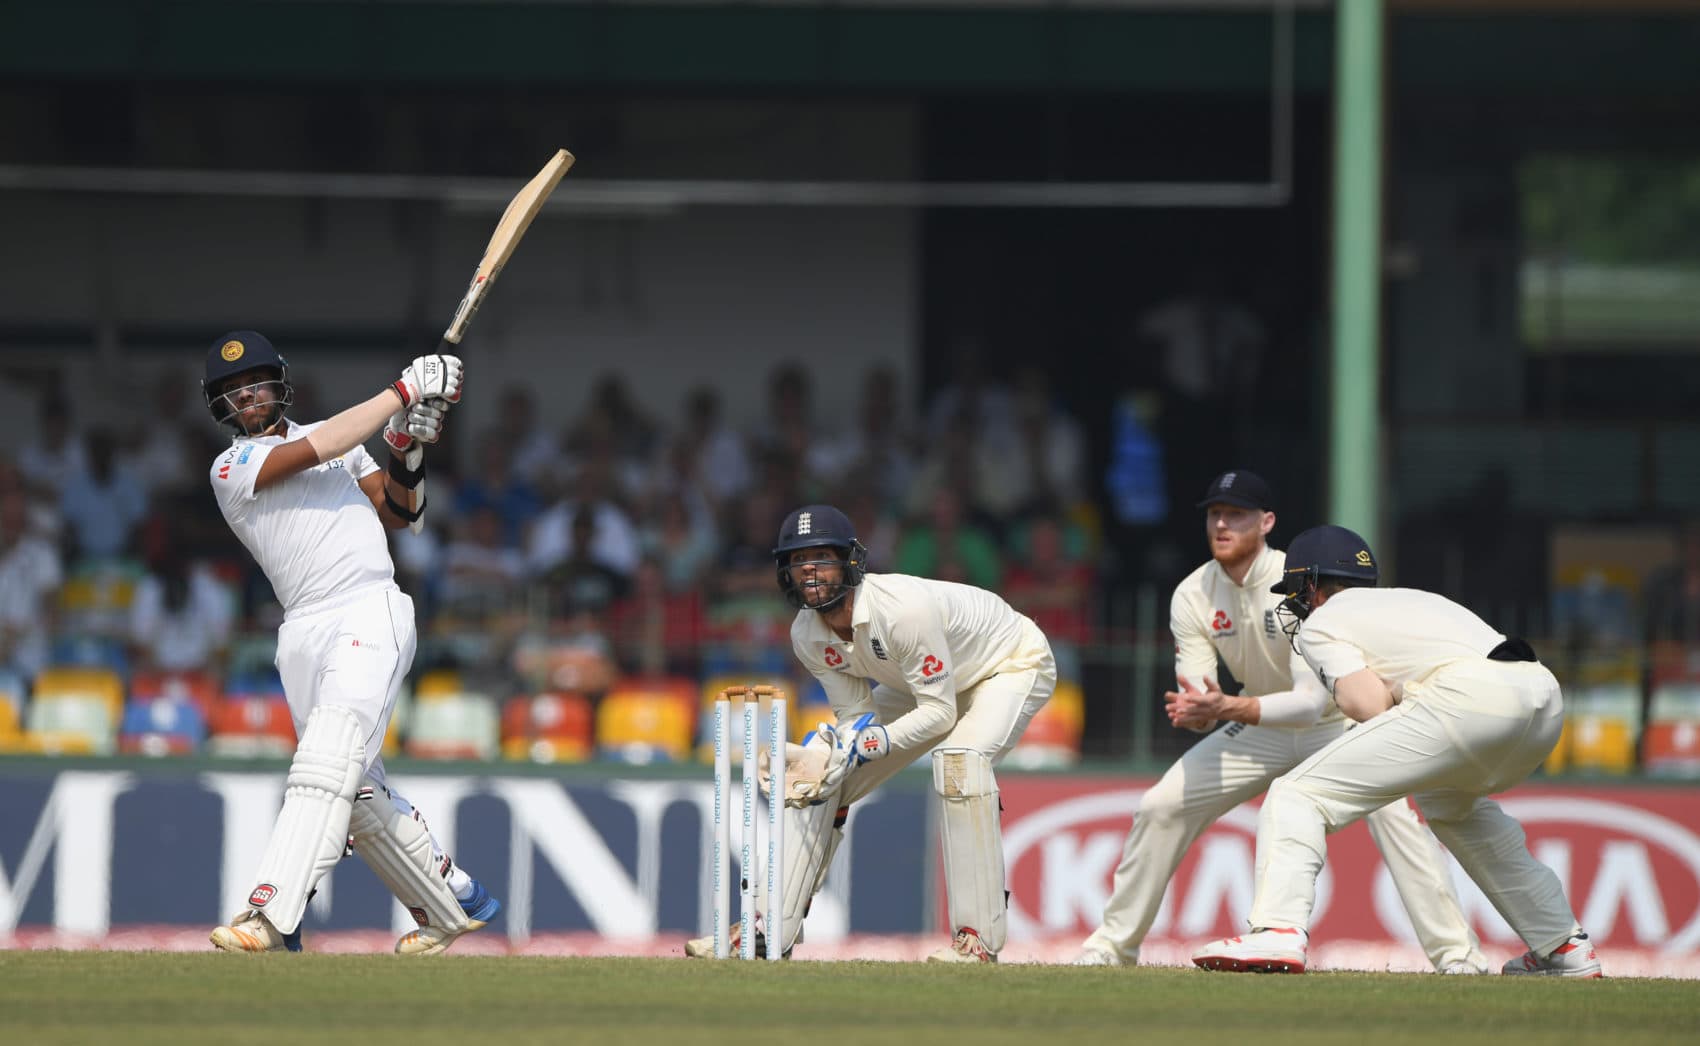 The Sri Lankan national cricket team bats against England at a match in Sri Lanka. (Stu Forster/Getty Images)